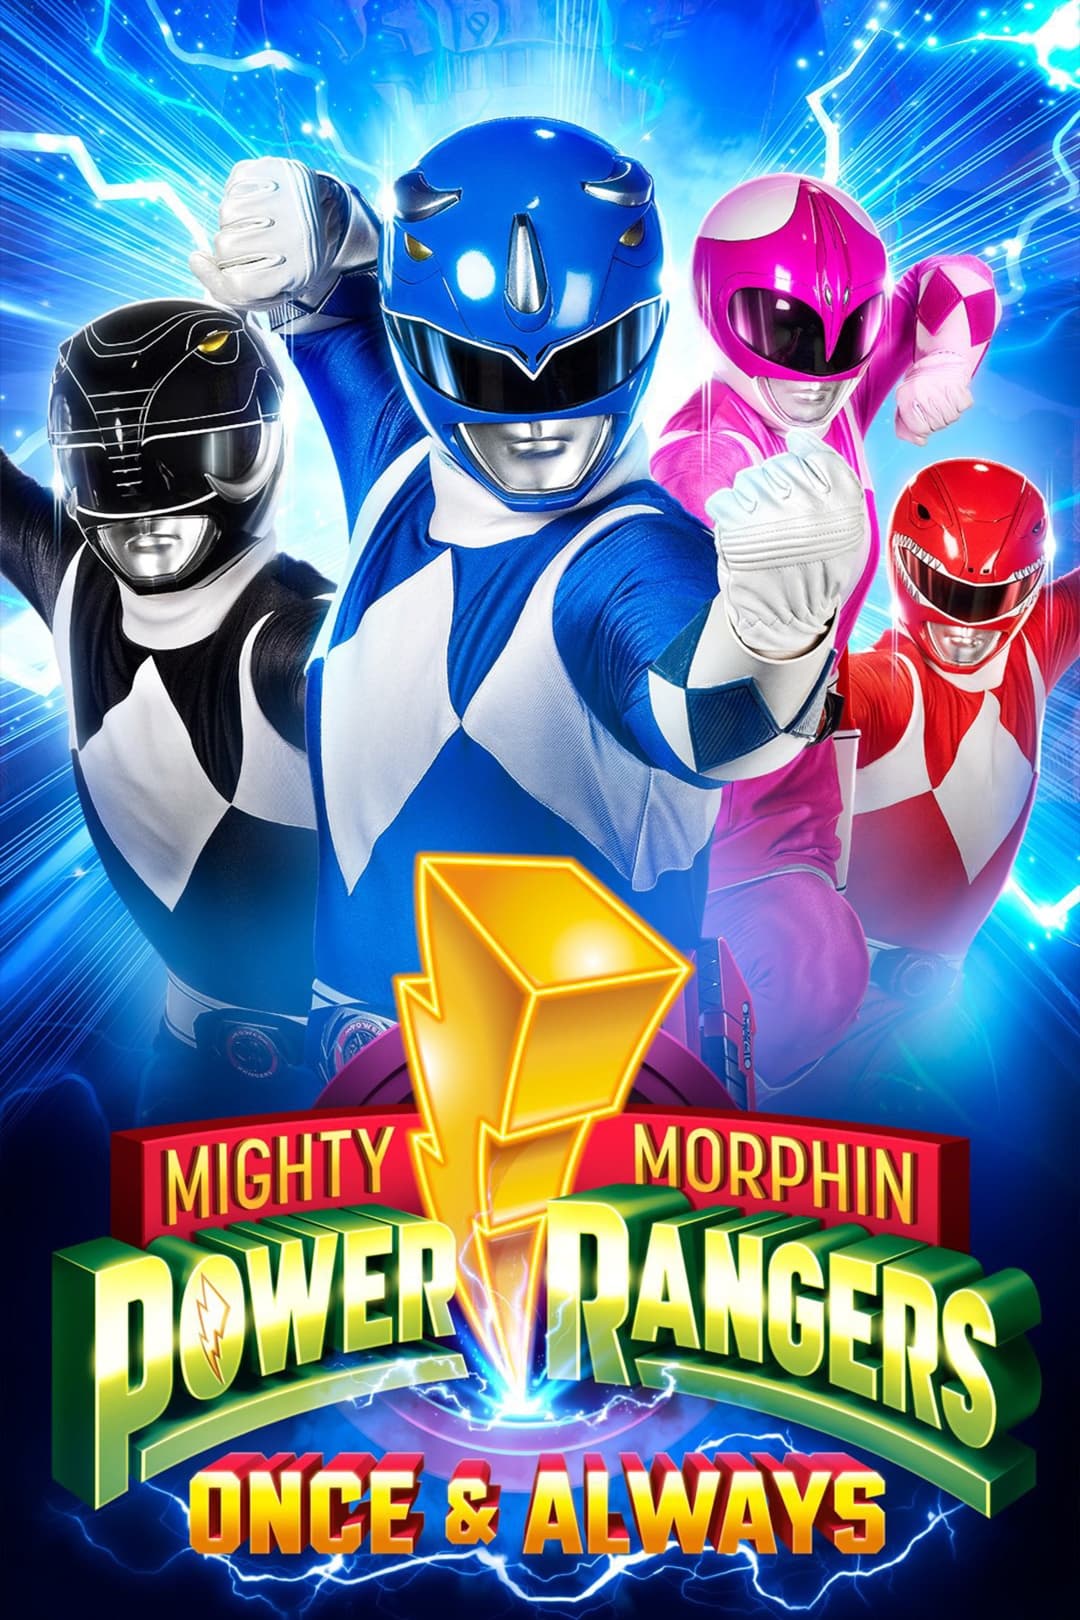 Mighty Morphin Power Rangers: Ayer, hoy y siempre